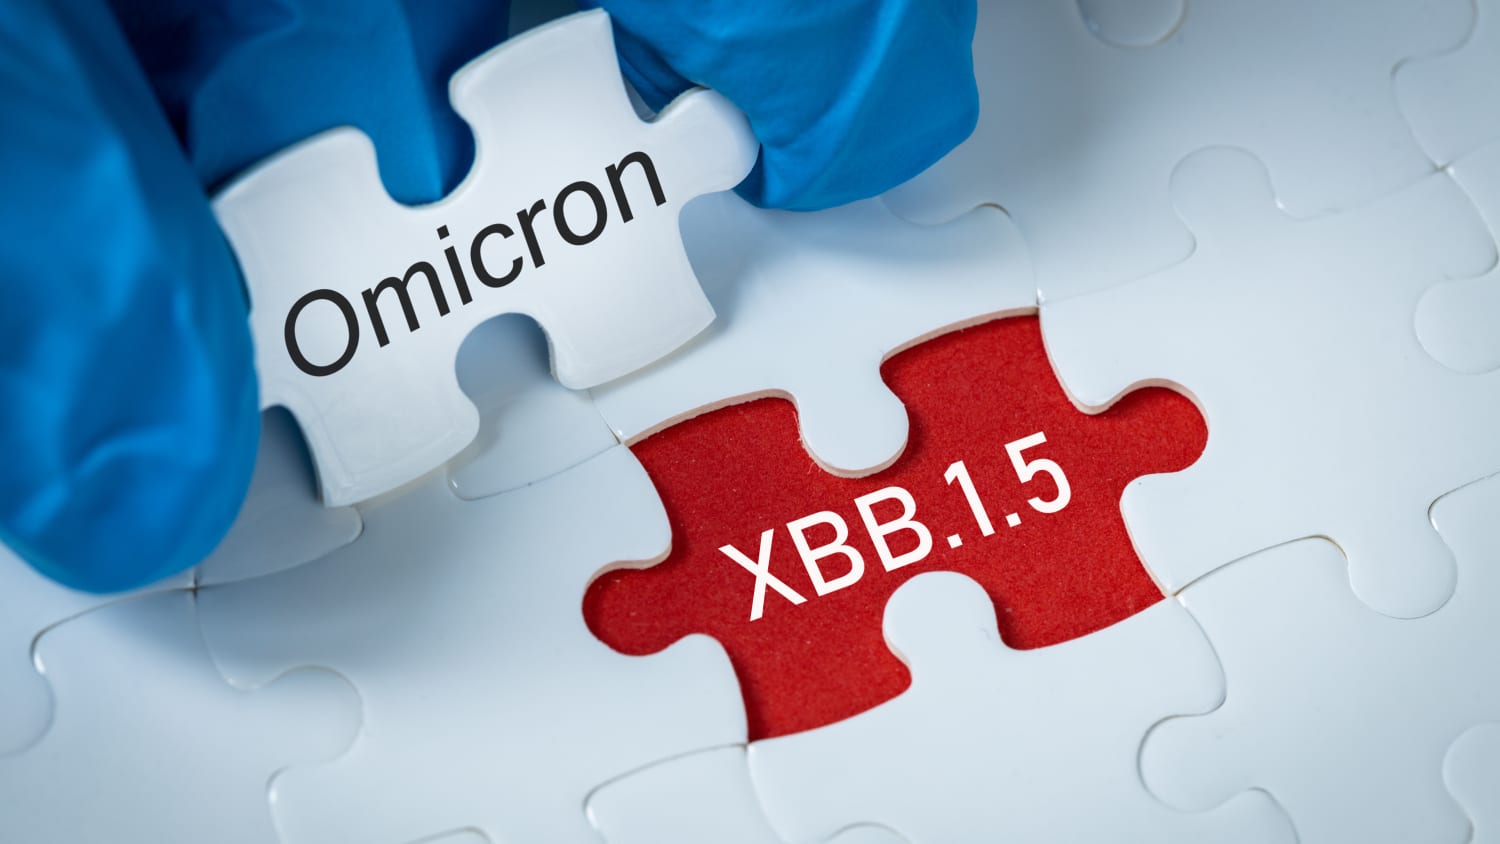 Omicron XBB1.5 puzzle pieces